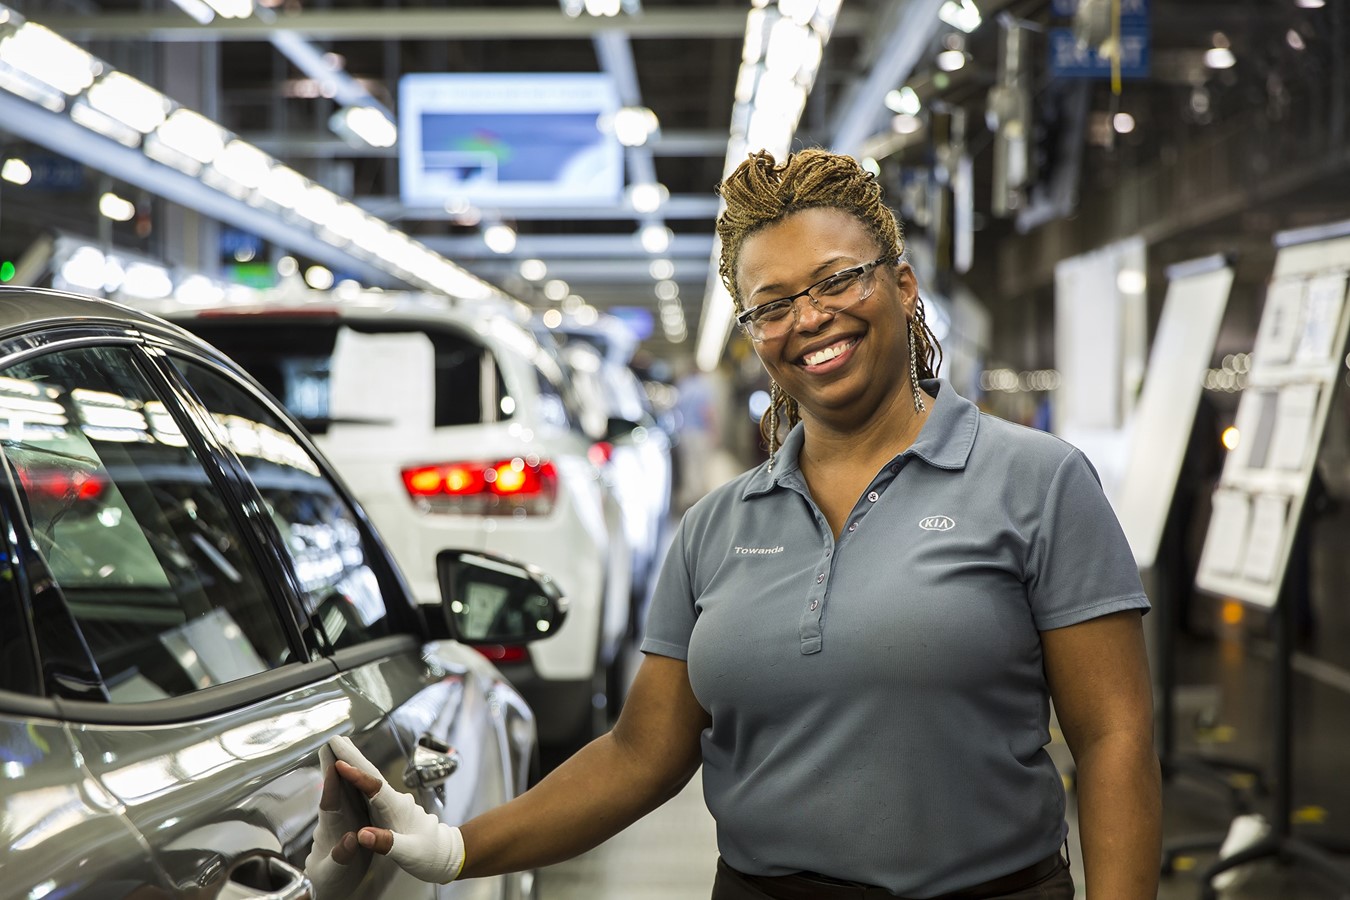 KMMG team members work each day to produce world-class quality products. Just recently, the one millionth Sorento rolled off KMMG’s assembly line in West Point, Ga.